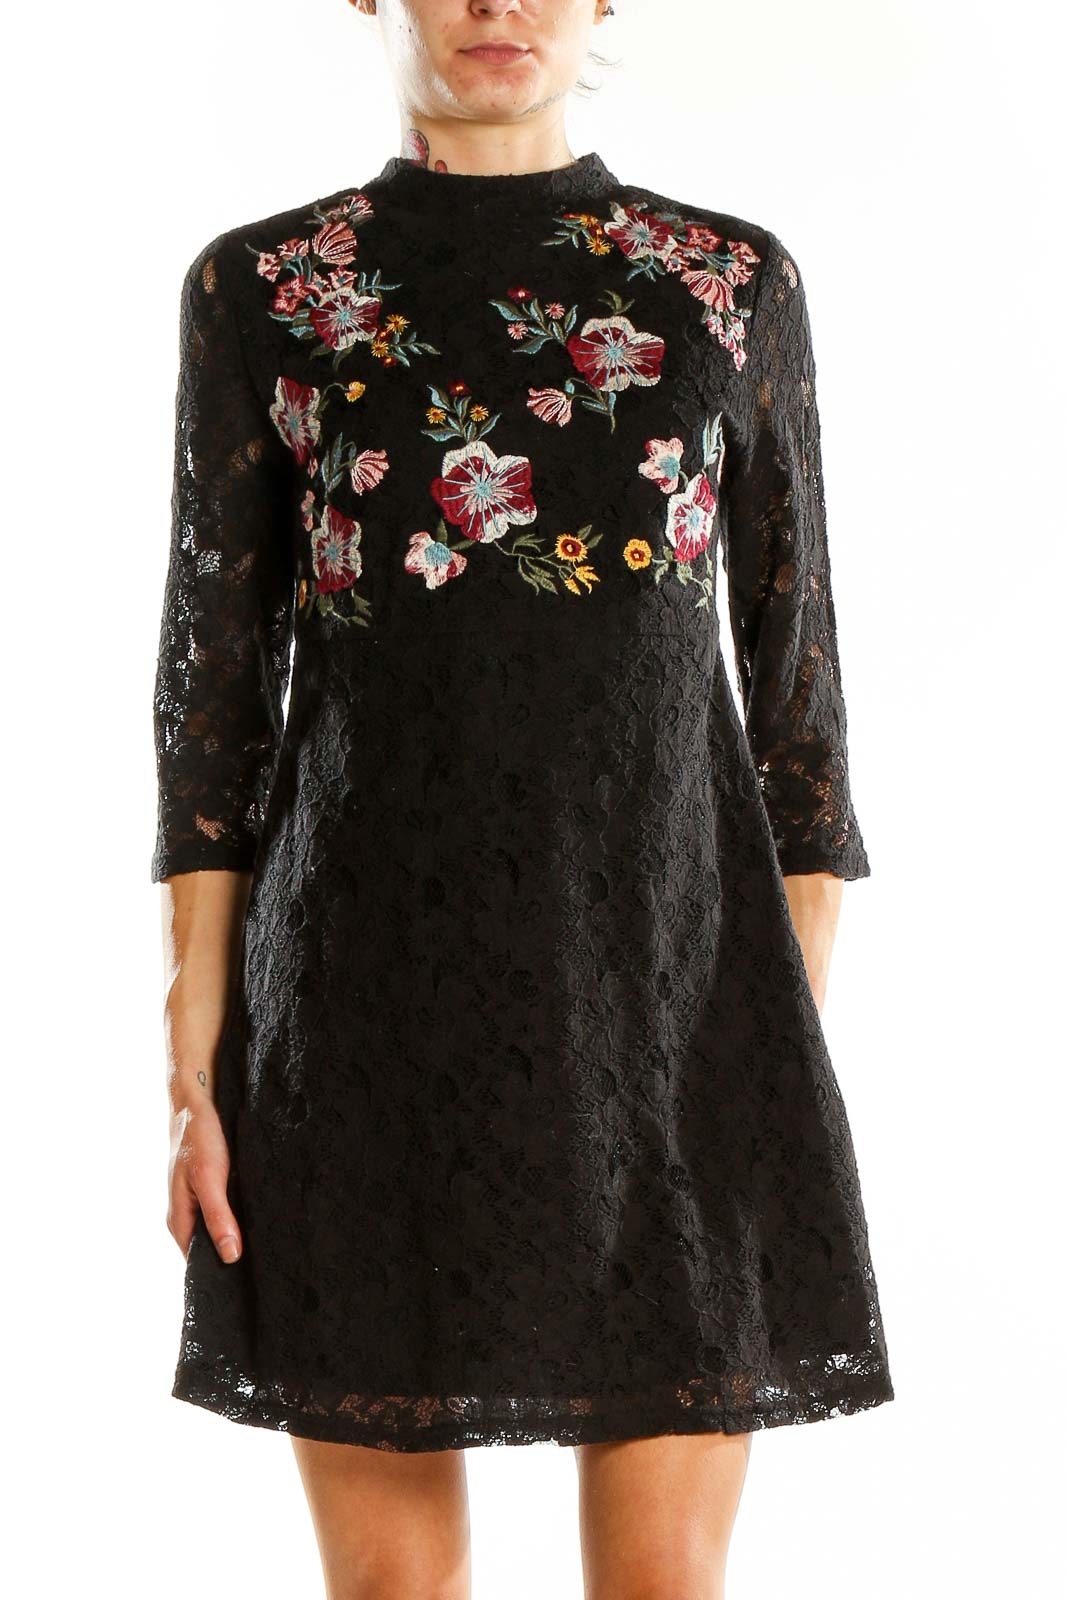 Black Embroidered Floral Lace Mini Dress Front